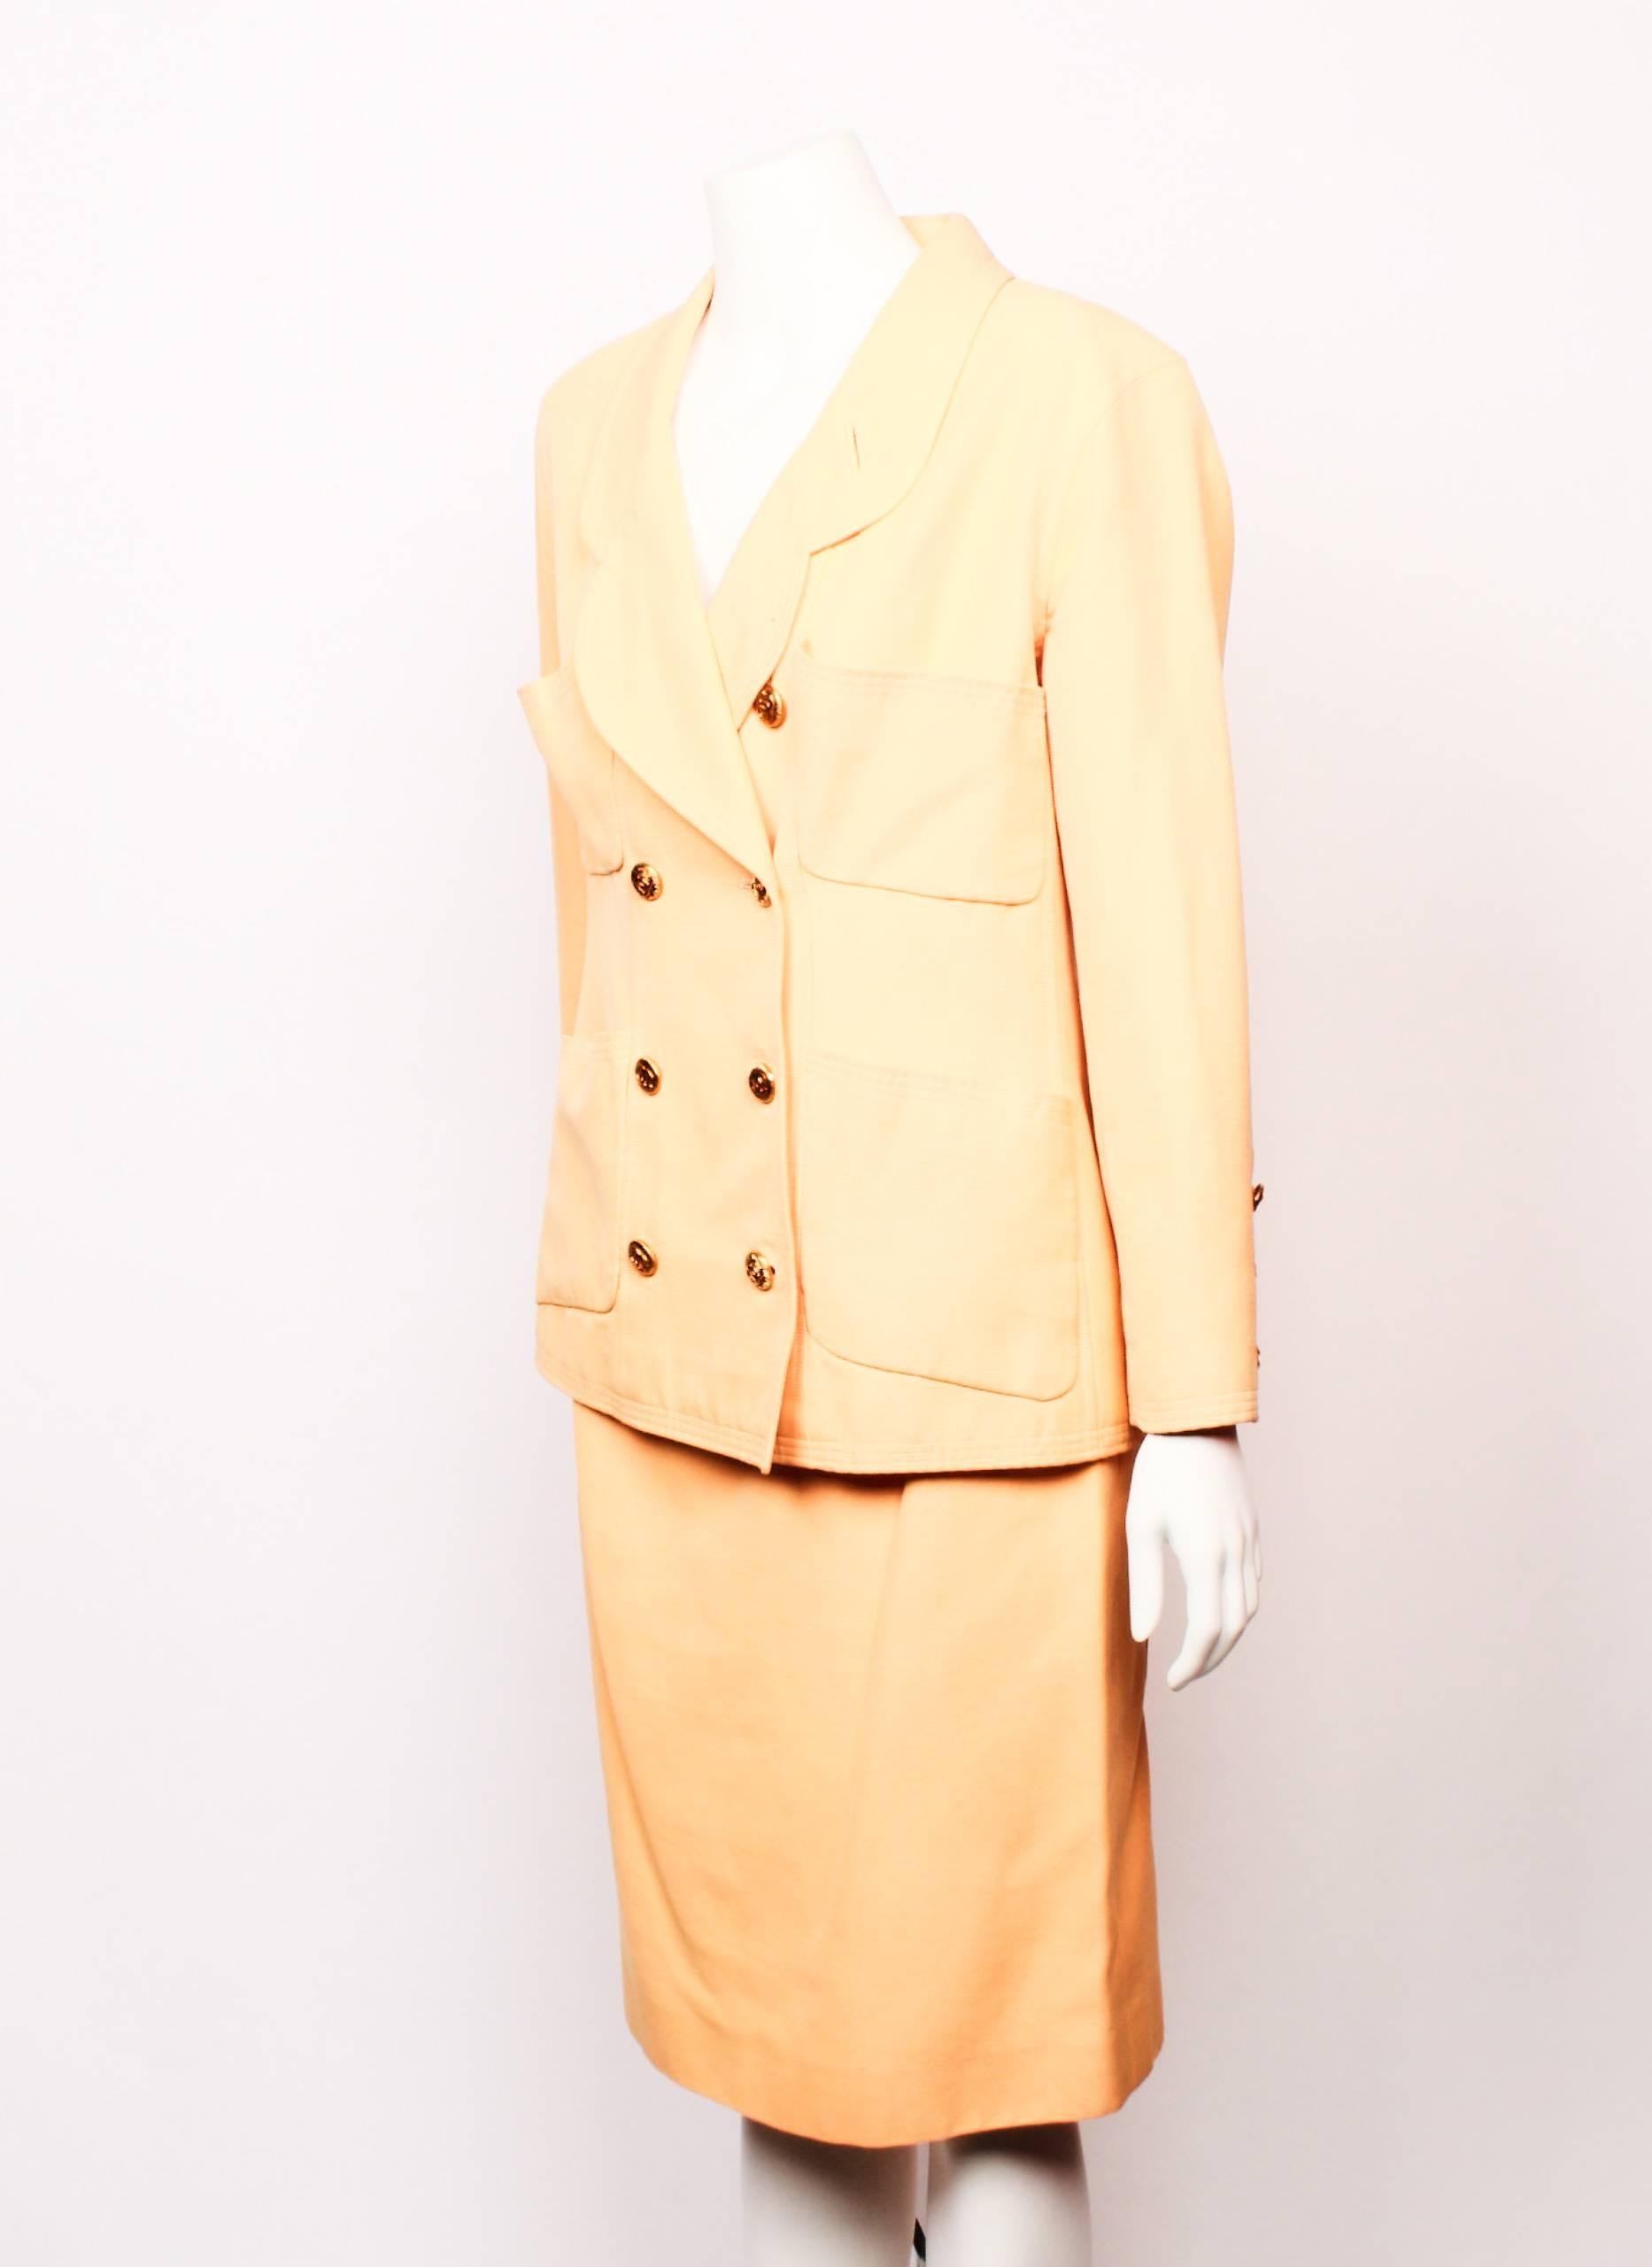 Beautiful two piece Chanel Boutique straight pencil skirt and double breasted jacket suit ensemble in apricot cotton faille.
The jacket features a lovely soft petal shaped lapel and four patch pockets. Double breasted closure and cuffs have iconic